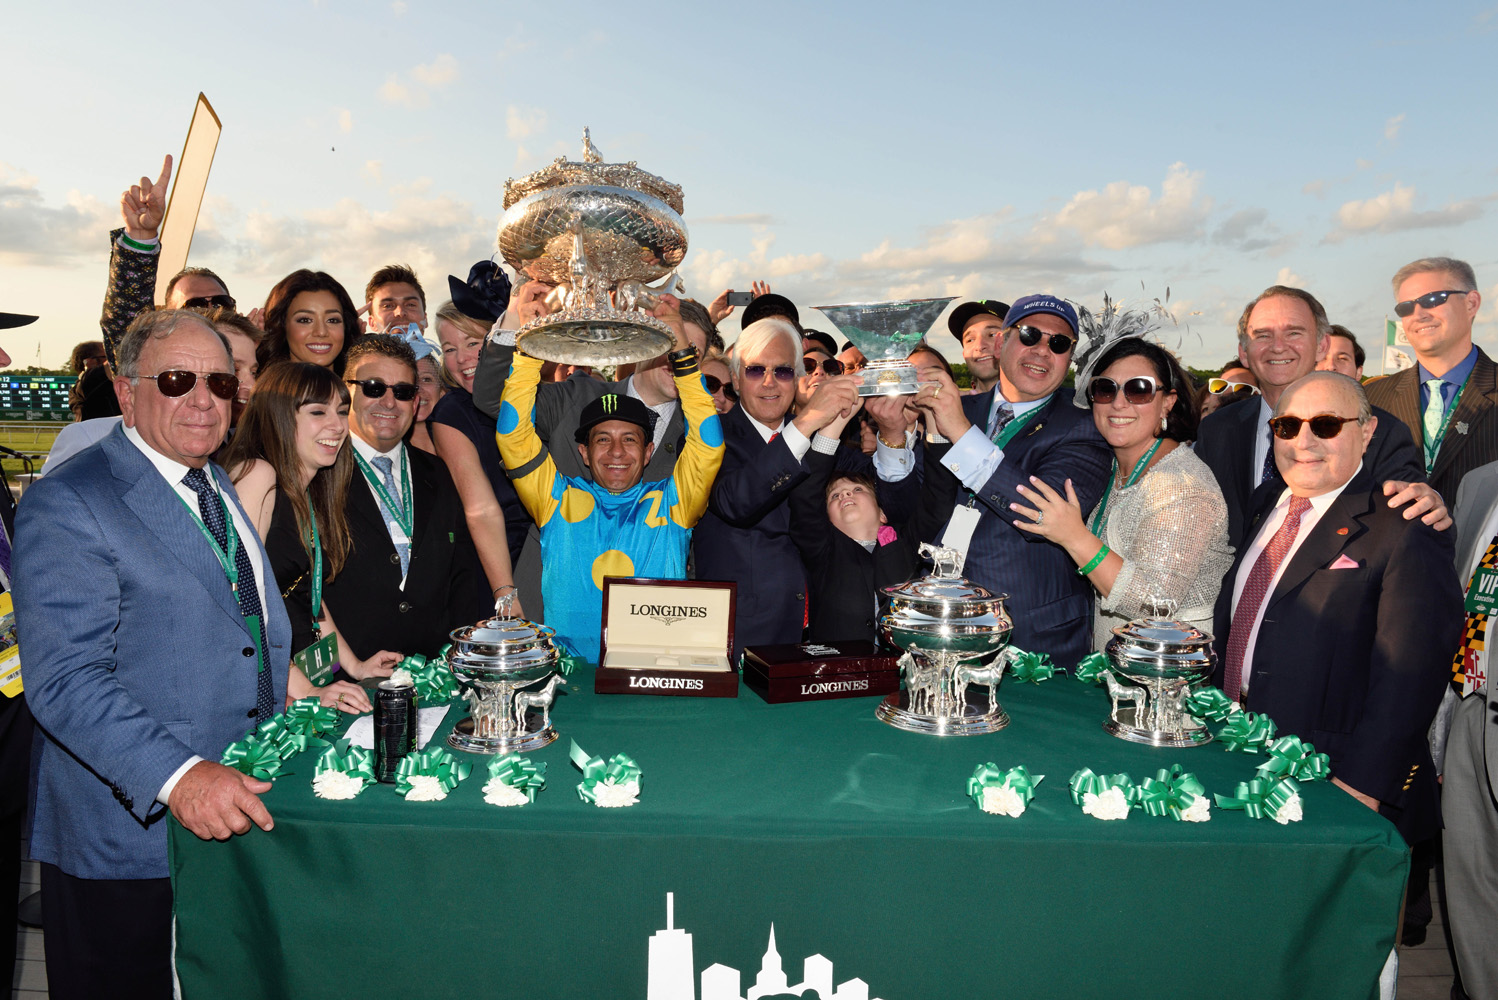 Bob Baffert and the winning connections of American Pharoah during the 2015 Belmont Stakes and Triple Crown trophy presentation (NYRA)